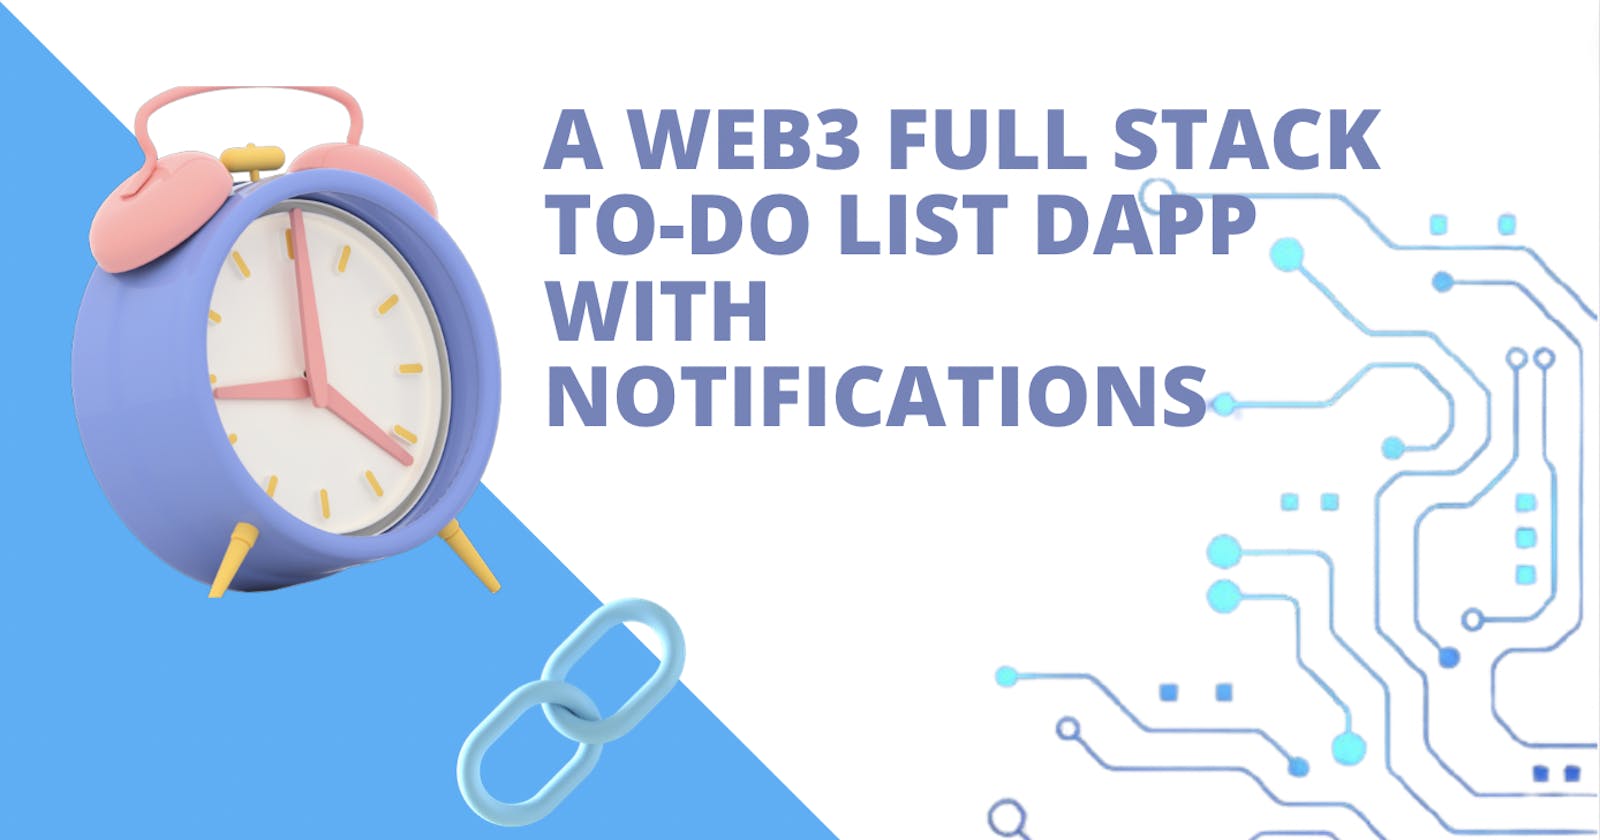 A Web3 Full Stack To-do list Dapp with Notifications